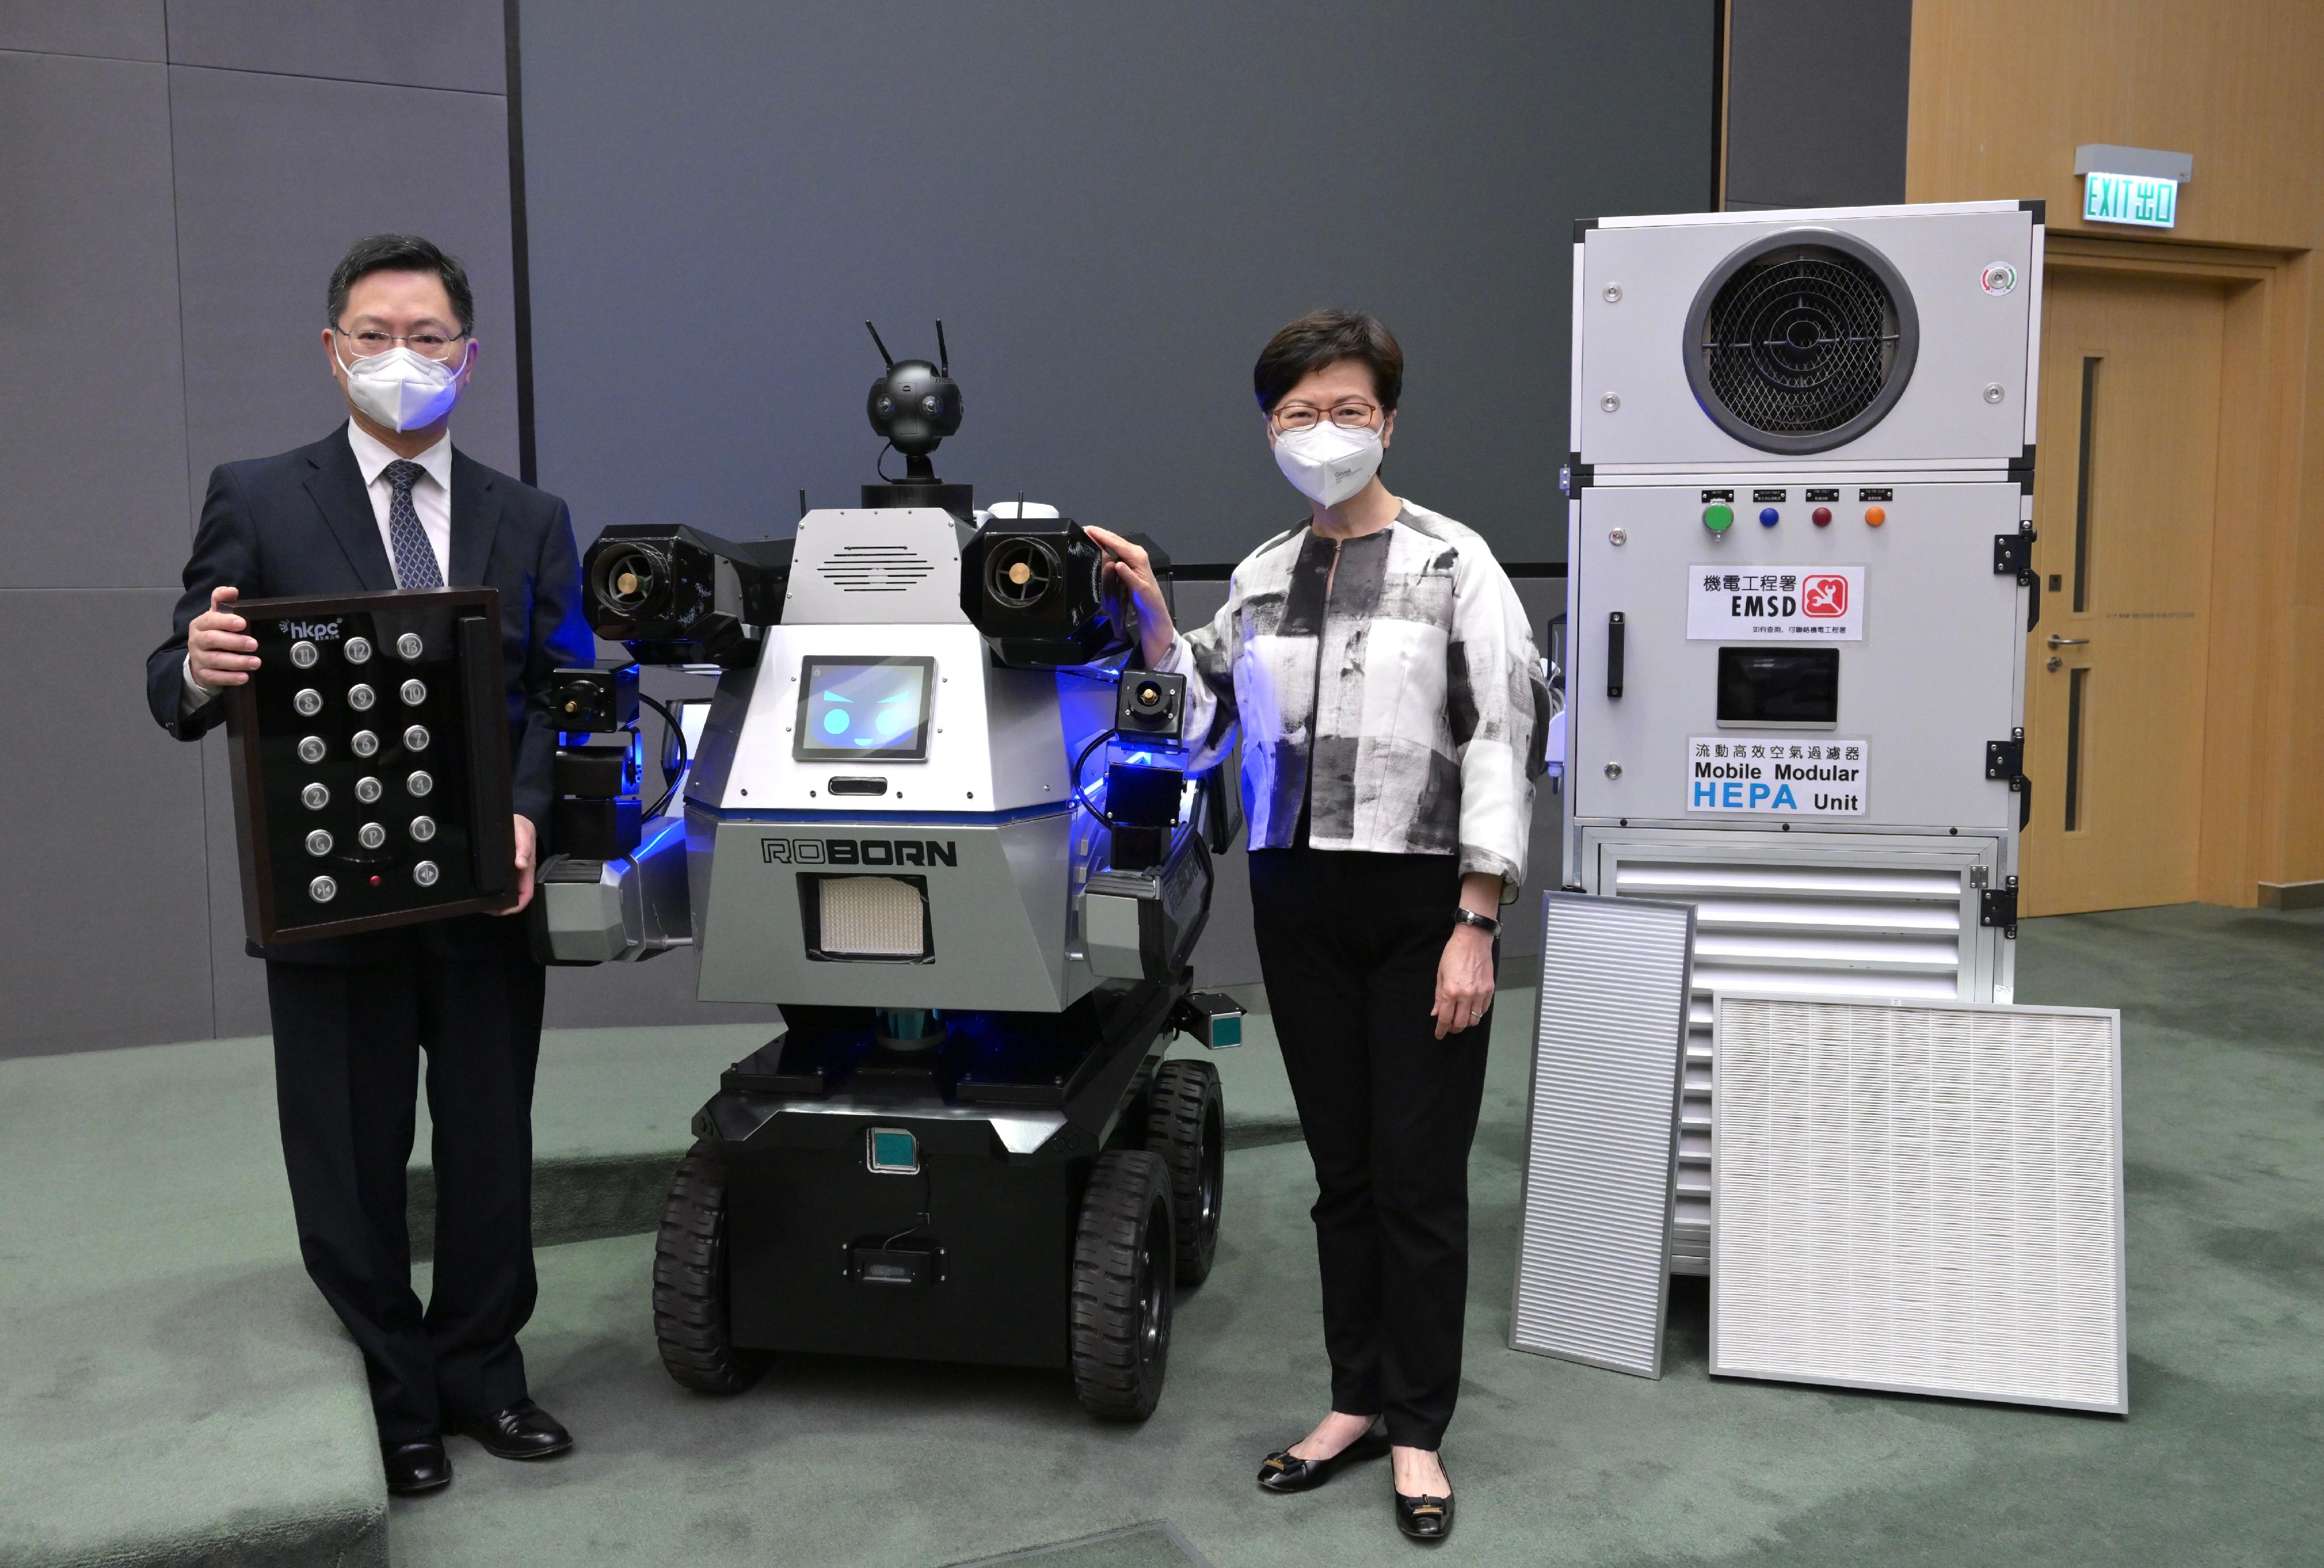 The Chief Executive, Mrs Carrie Lam (right), holds a press conference on measures to fight COVID-19 with the Secretary for Innovation and Technology, Mr Alfred Sit (left), at the Central Government Offices, Tamar, today (April 9), introducing technologies being used to prevent and combat epidemics including kNOw Touch, Outdoor Disinfection Robot "Sau Wu" and Mobile Modular High Efficiency Particulate Arrestance Filter Units.